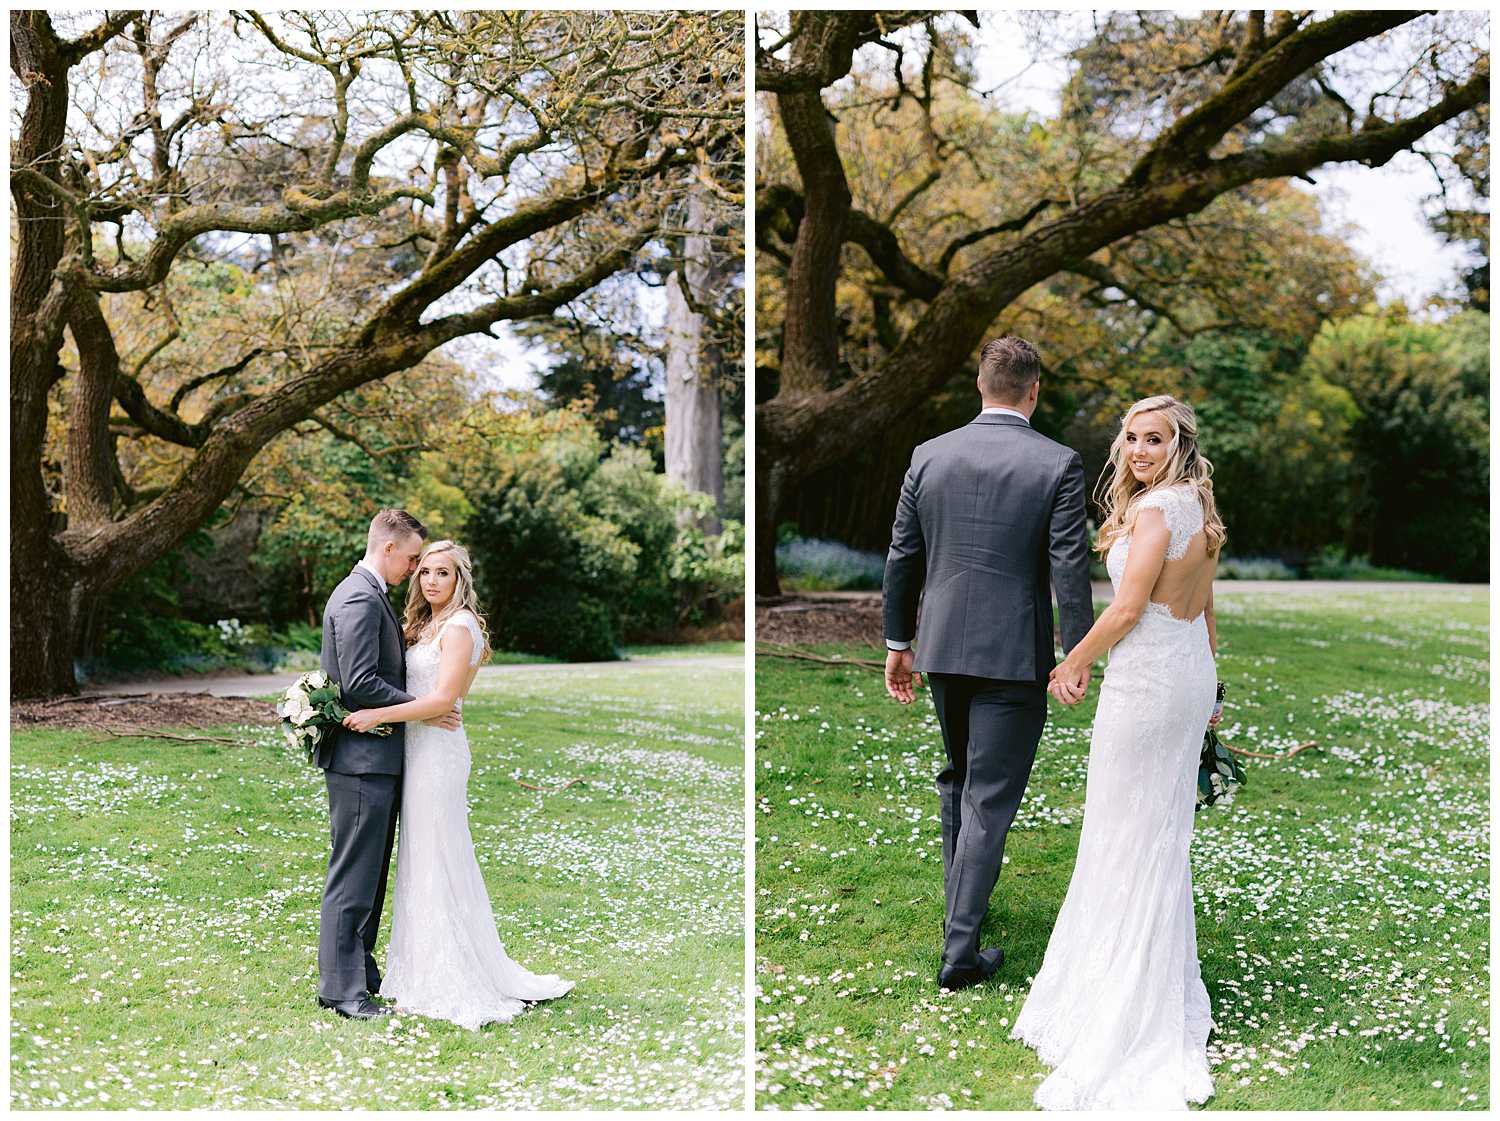 Kelsey and Mitchel on the lawn of the San Francisco Botanical Garden